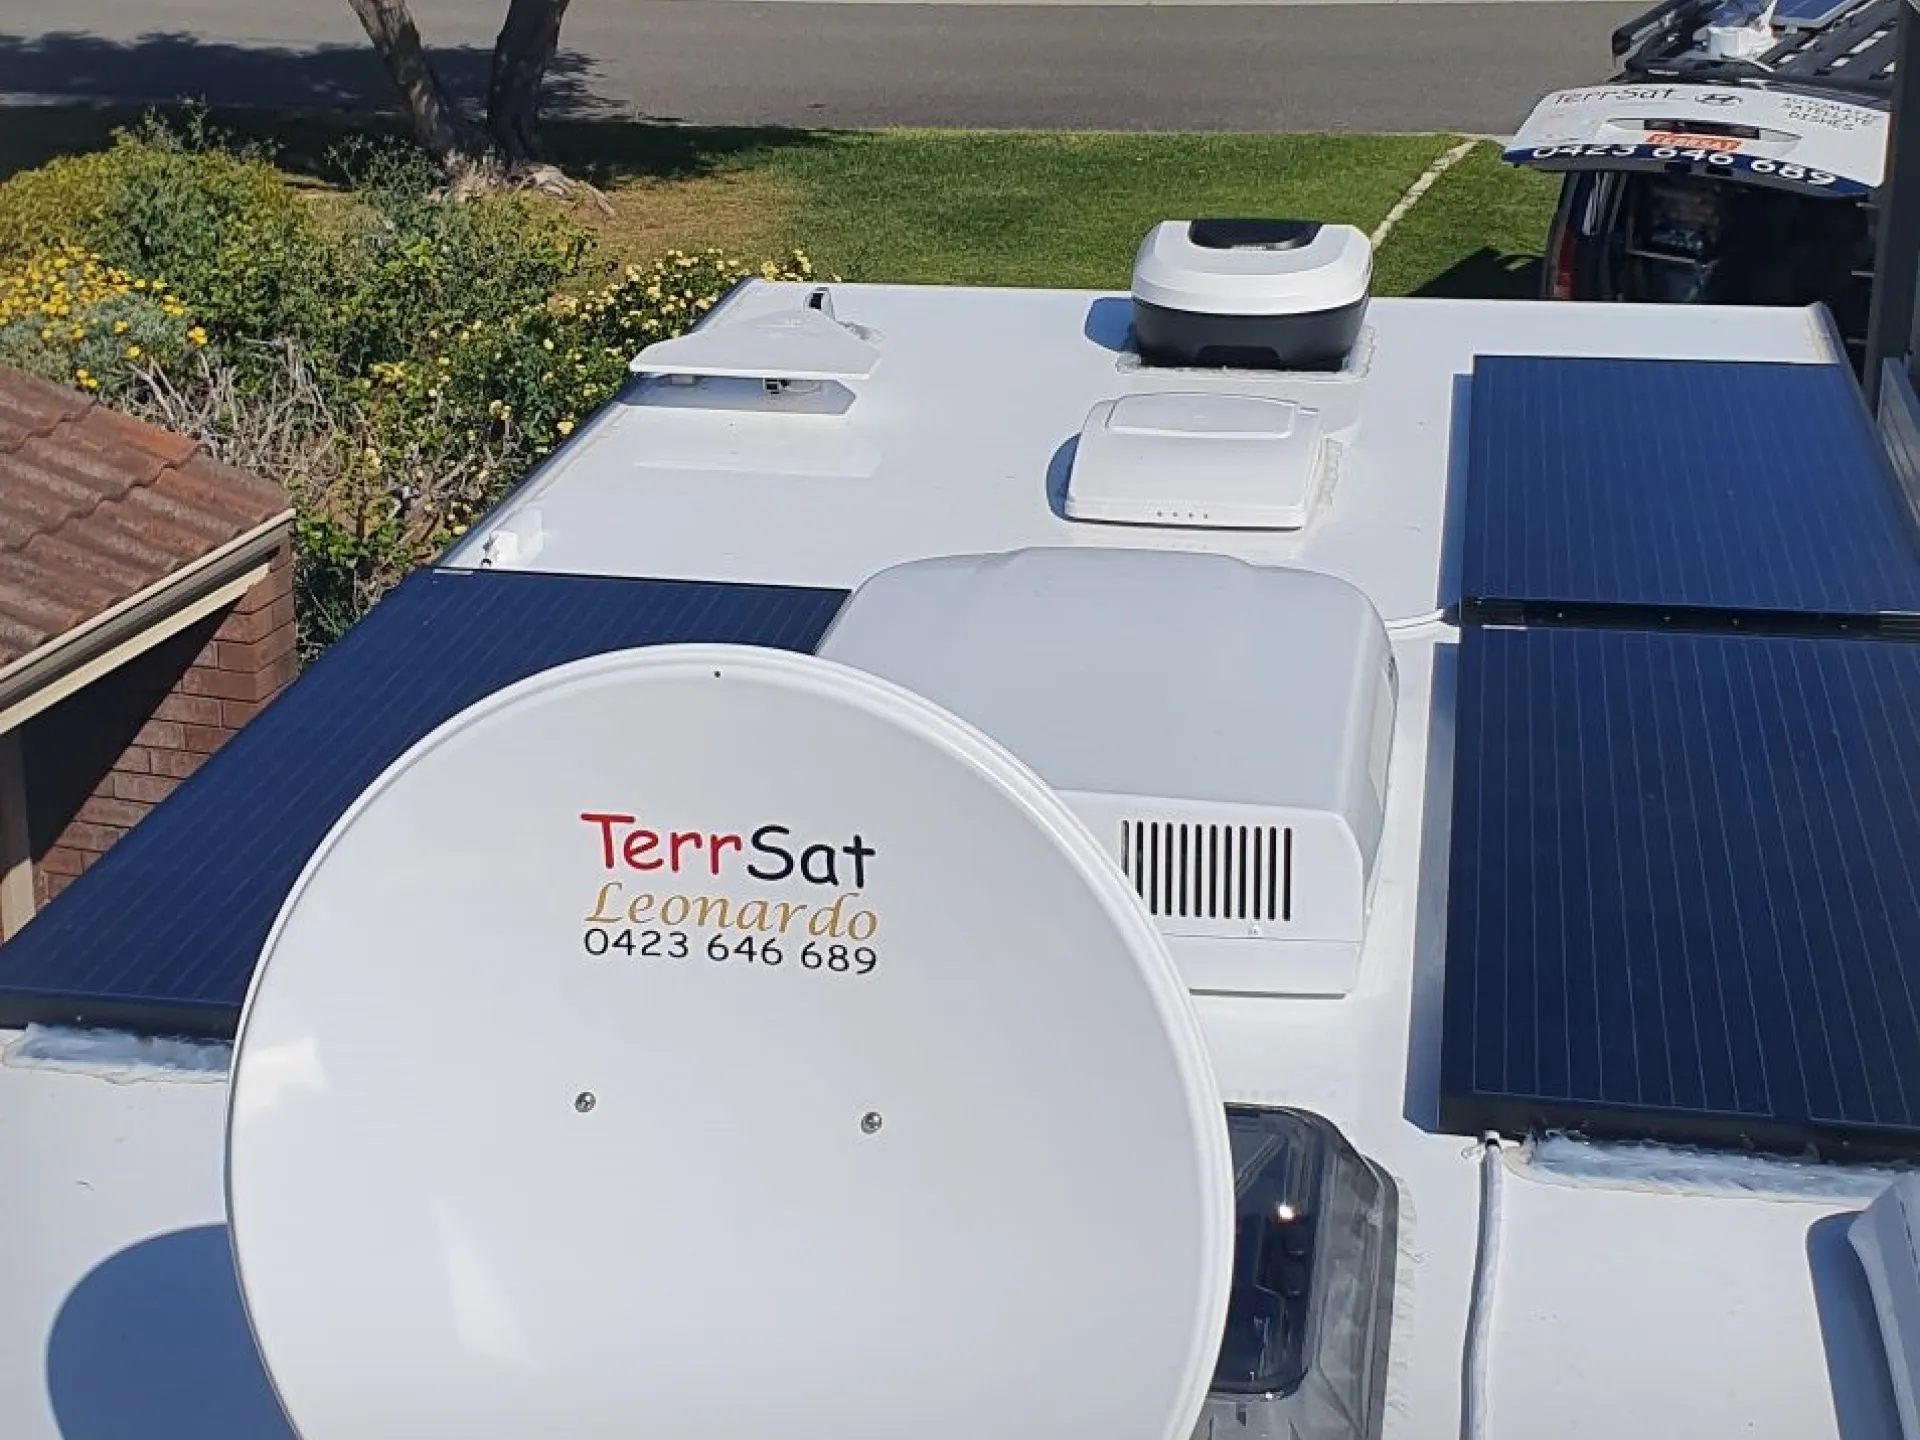 A photo of the roof of a caravan, serviced by TerrSat.